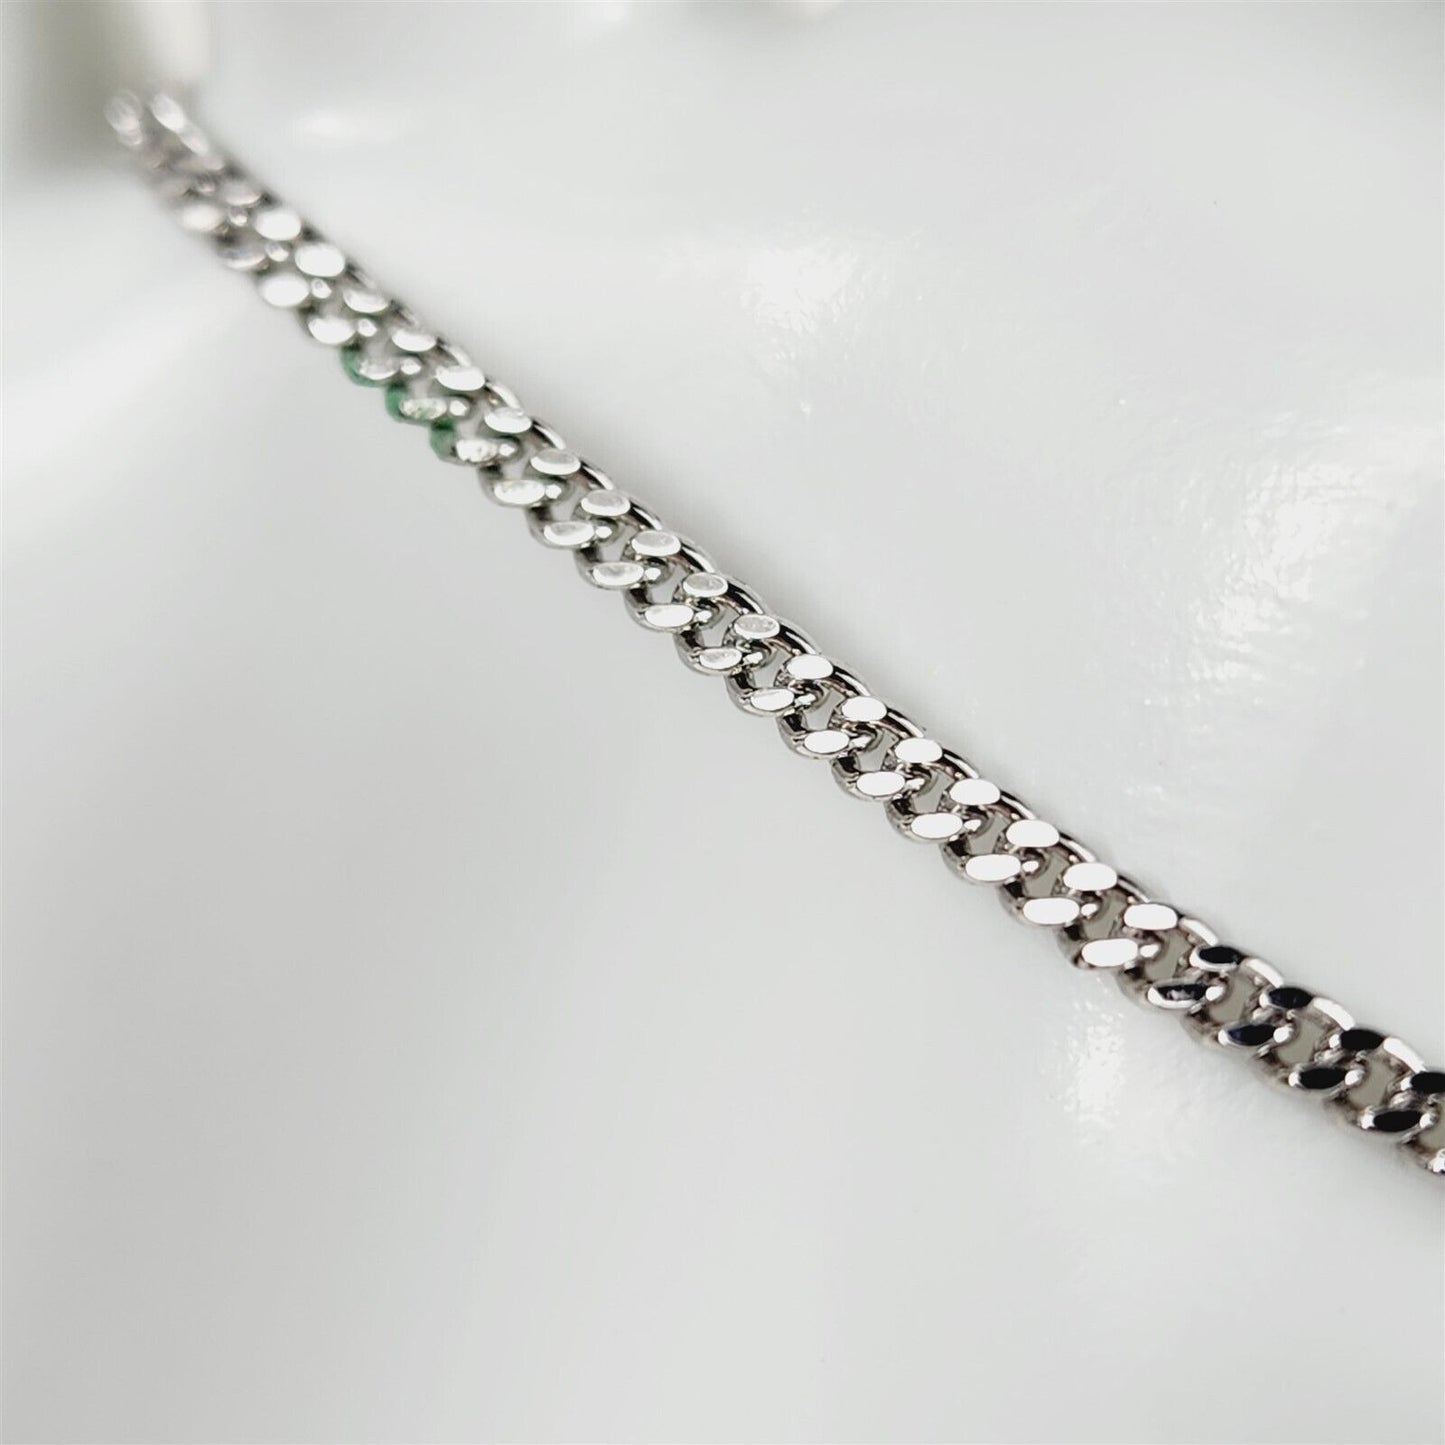 Rhodium Plated Anklet Ankle Bracelet Curb 2.25mm Chain - 10"